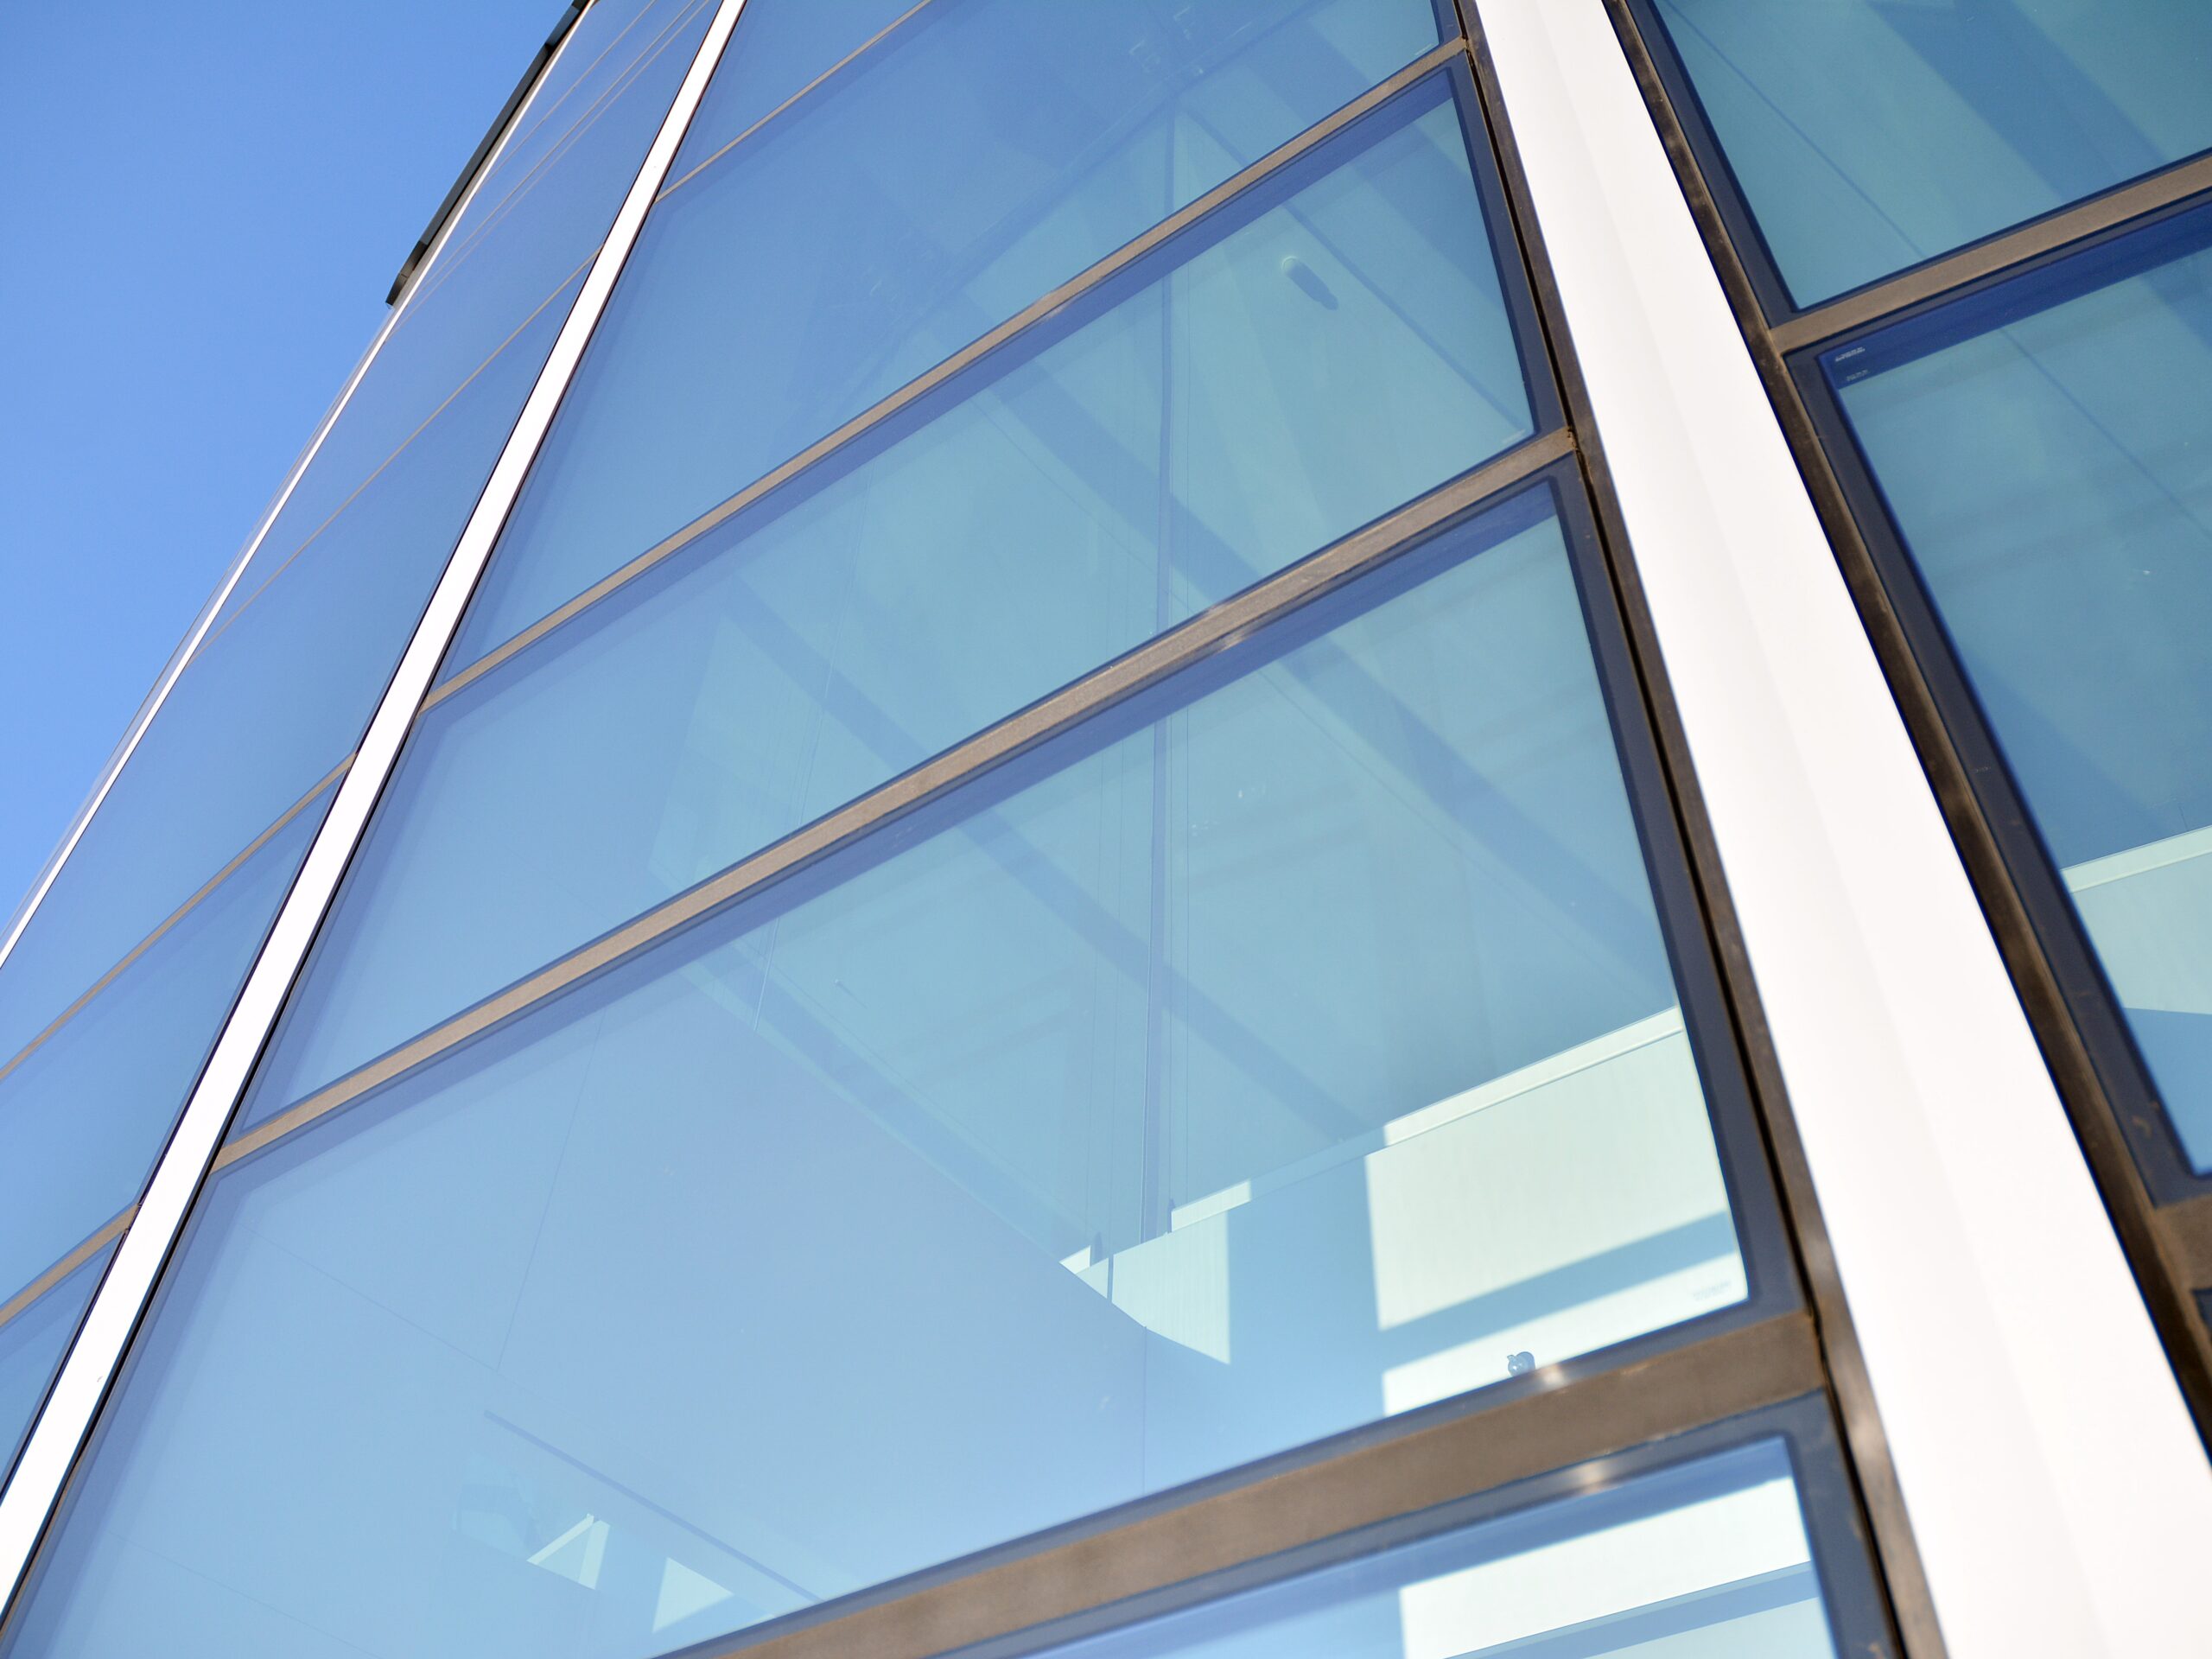 modern-office-building-with-glass-facade-clear-sky-background-transparent-glass